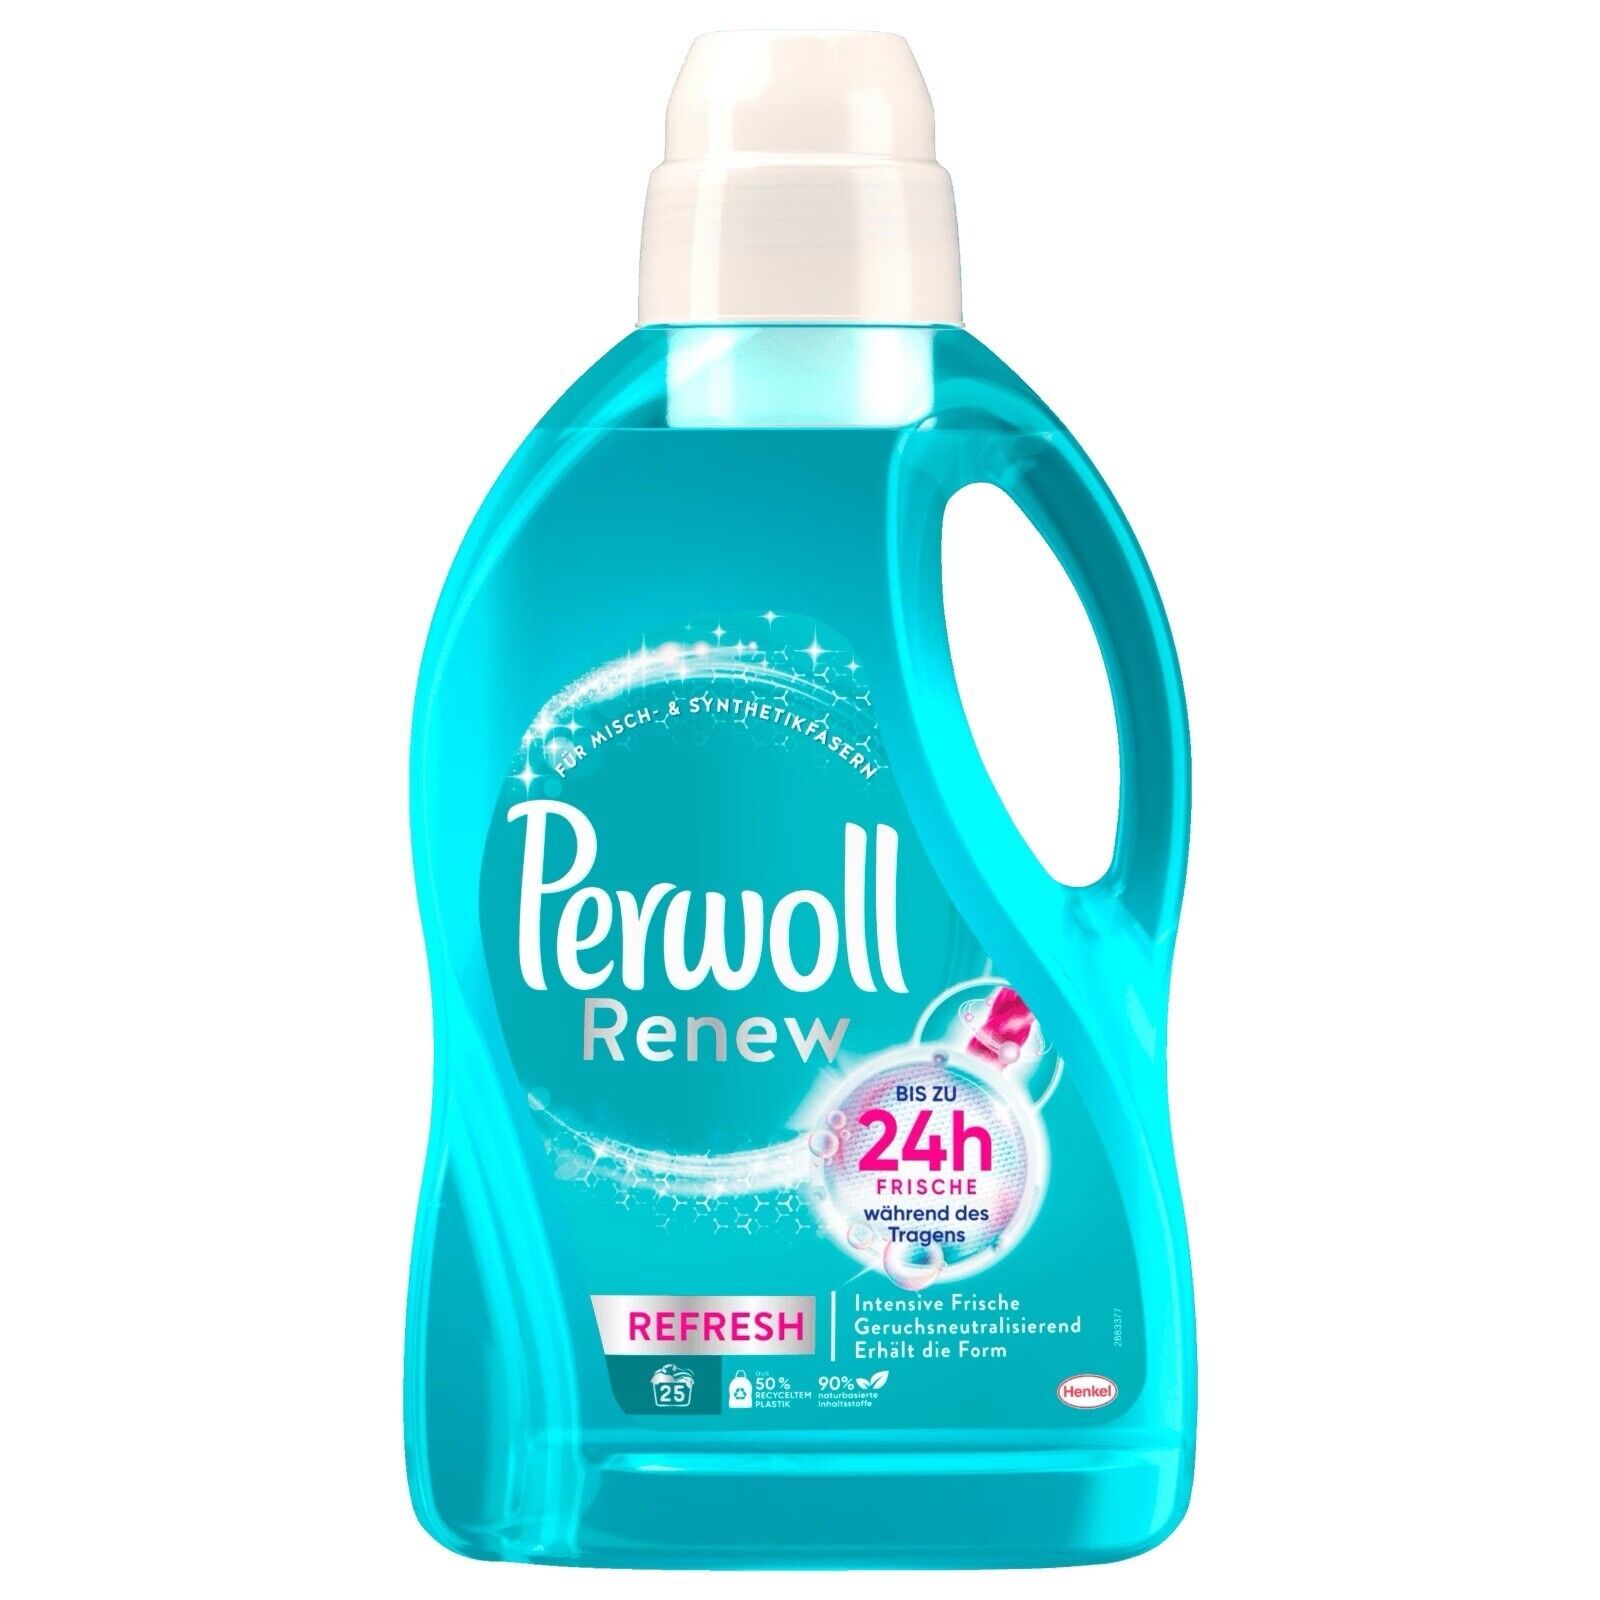 Primary image for PERWOLL Refresh liquid Laundry Detergent -1,37l/25 loads FREE SHIPPING